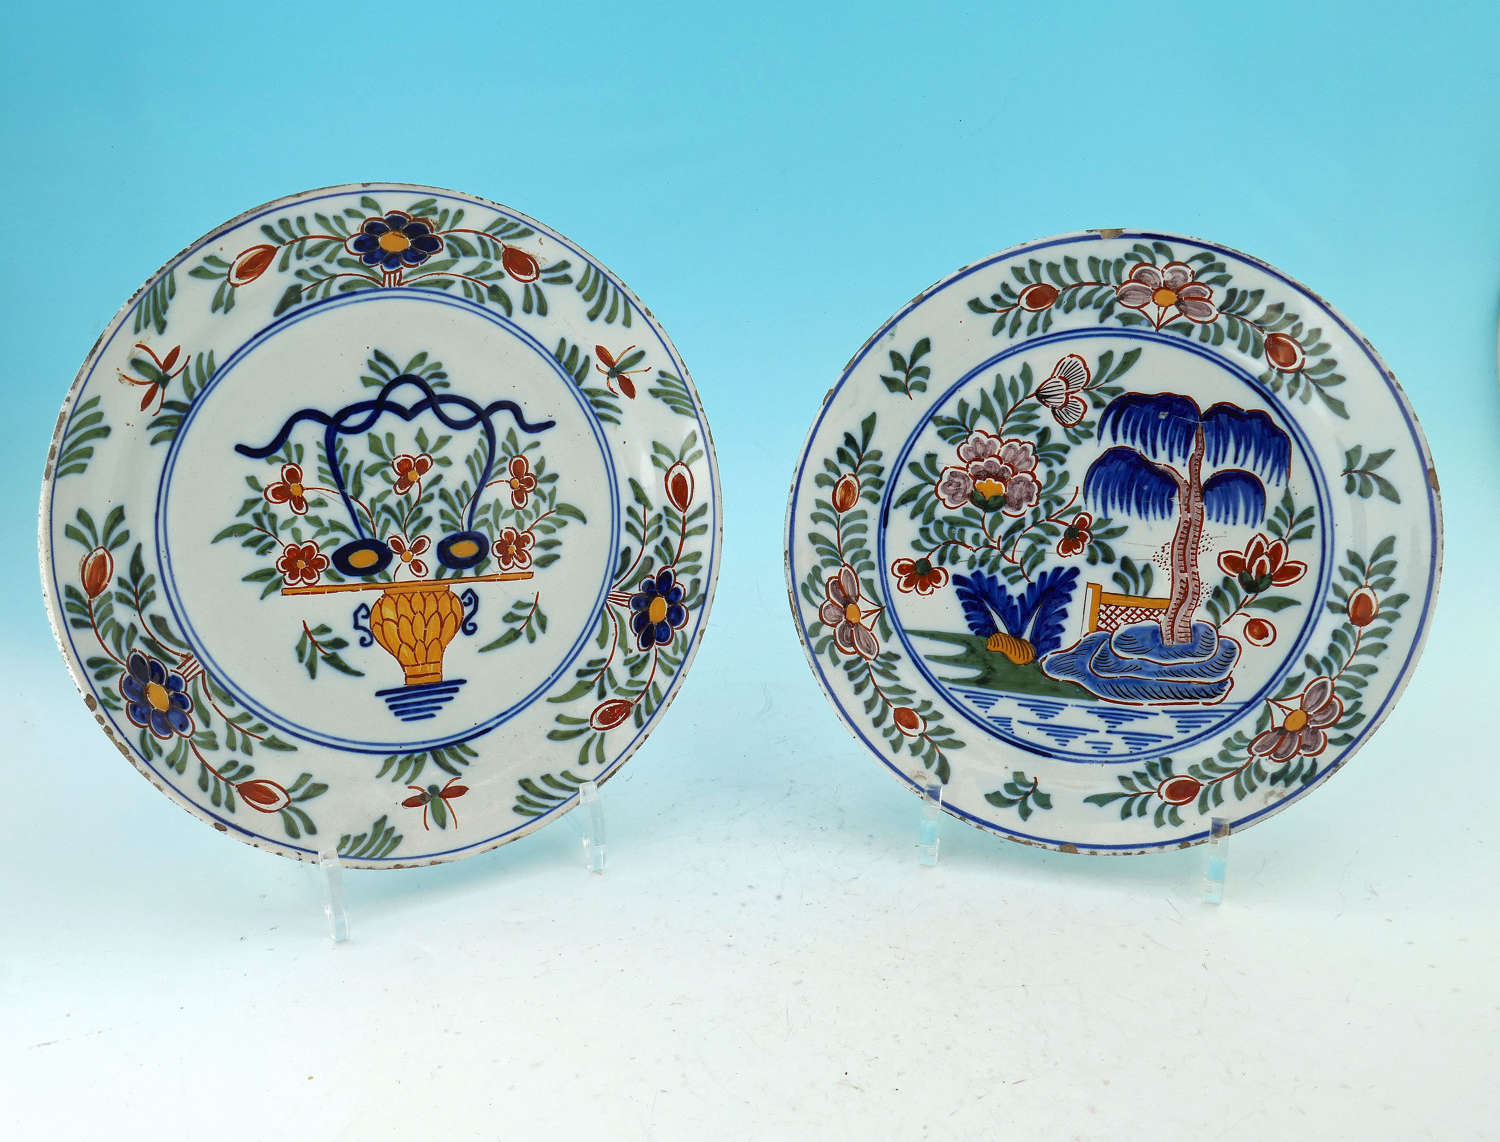 Antique Pottery Early 18thc Two Polychrome Delft Plates Marked  PK.